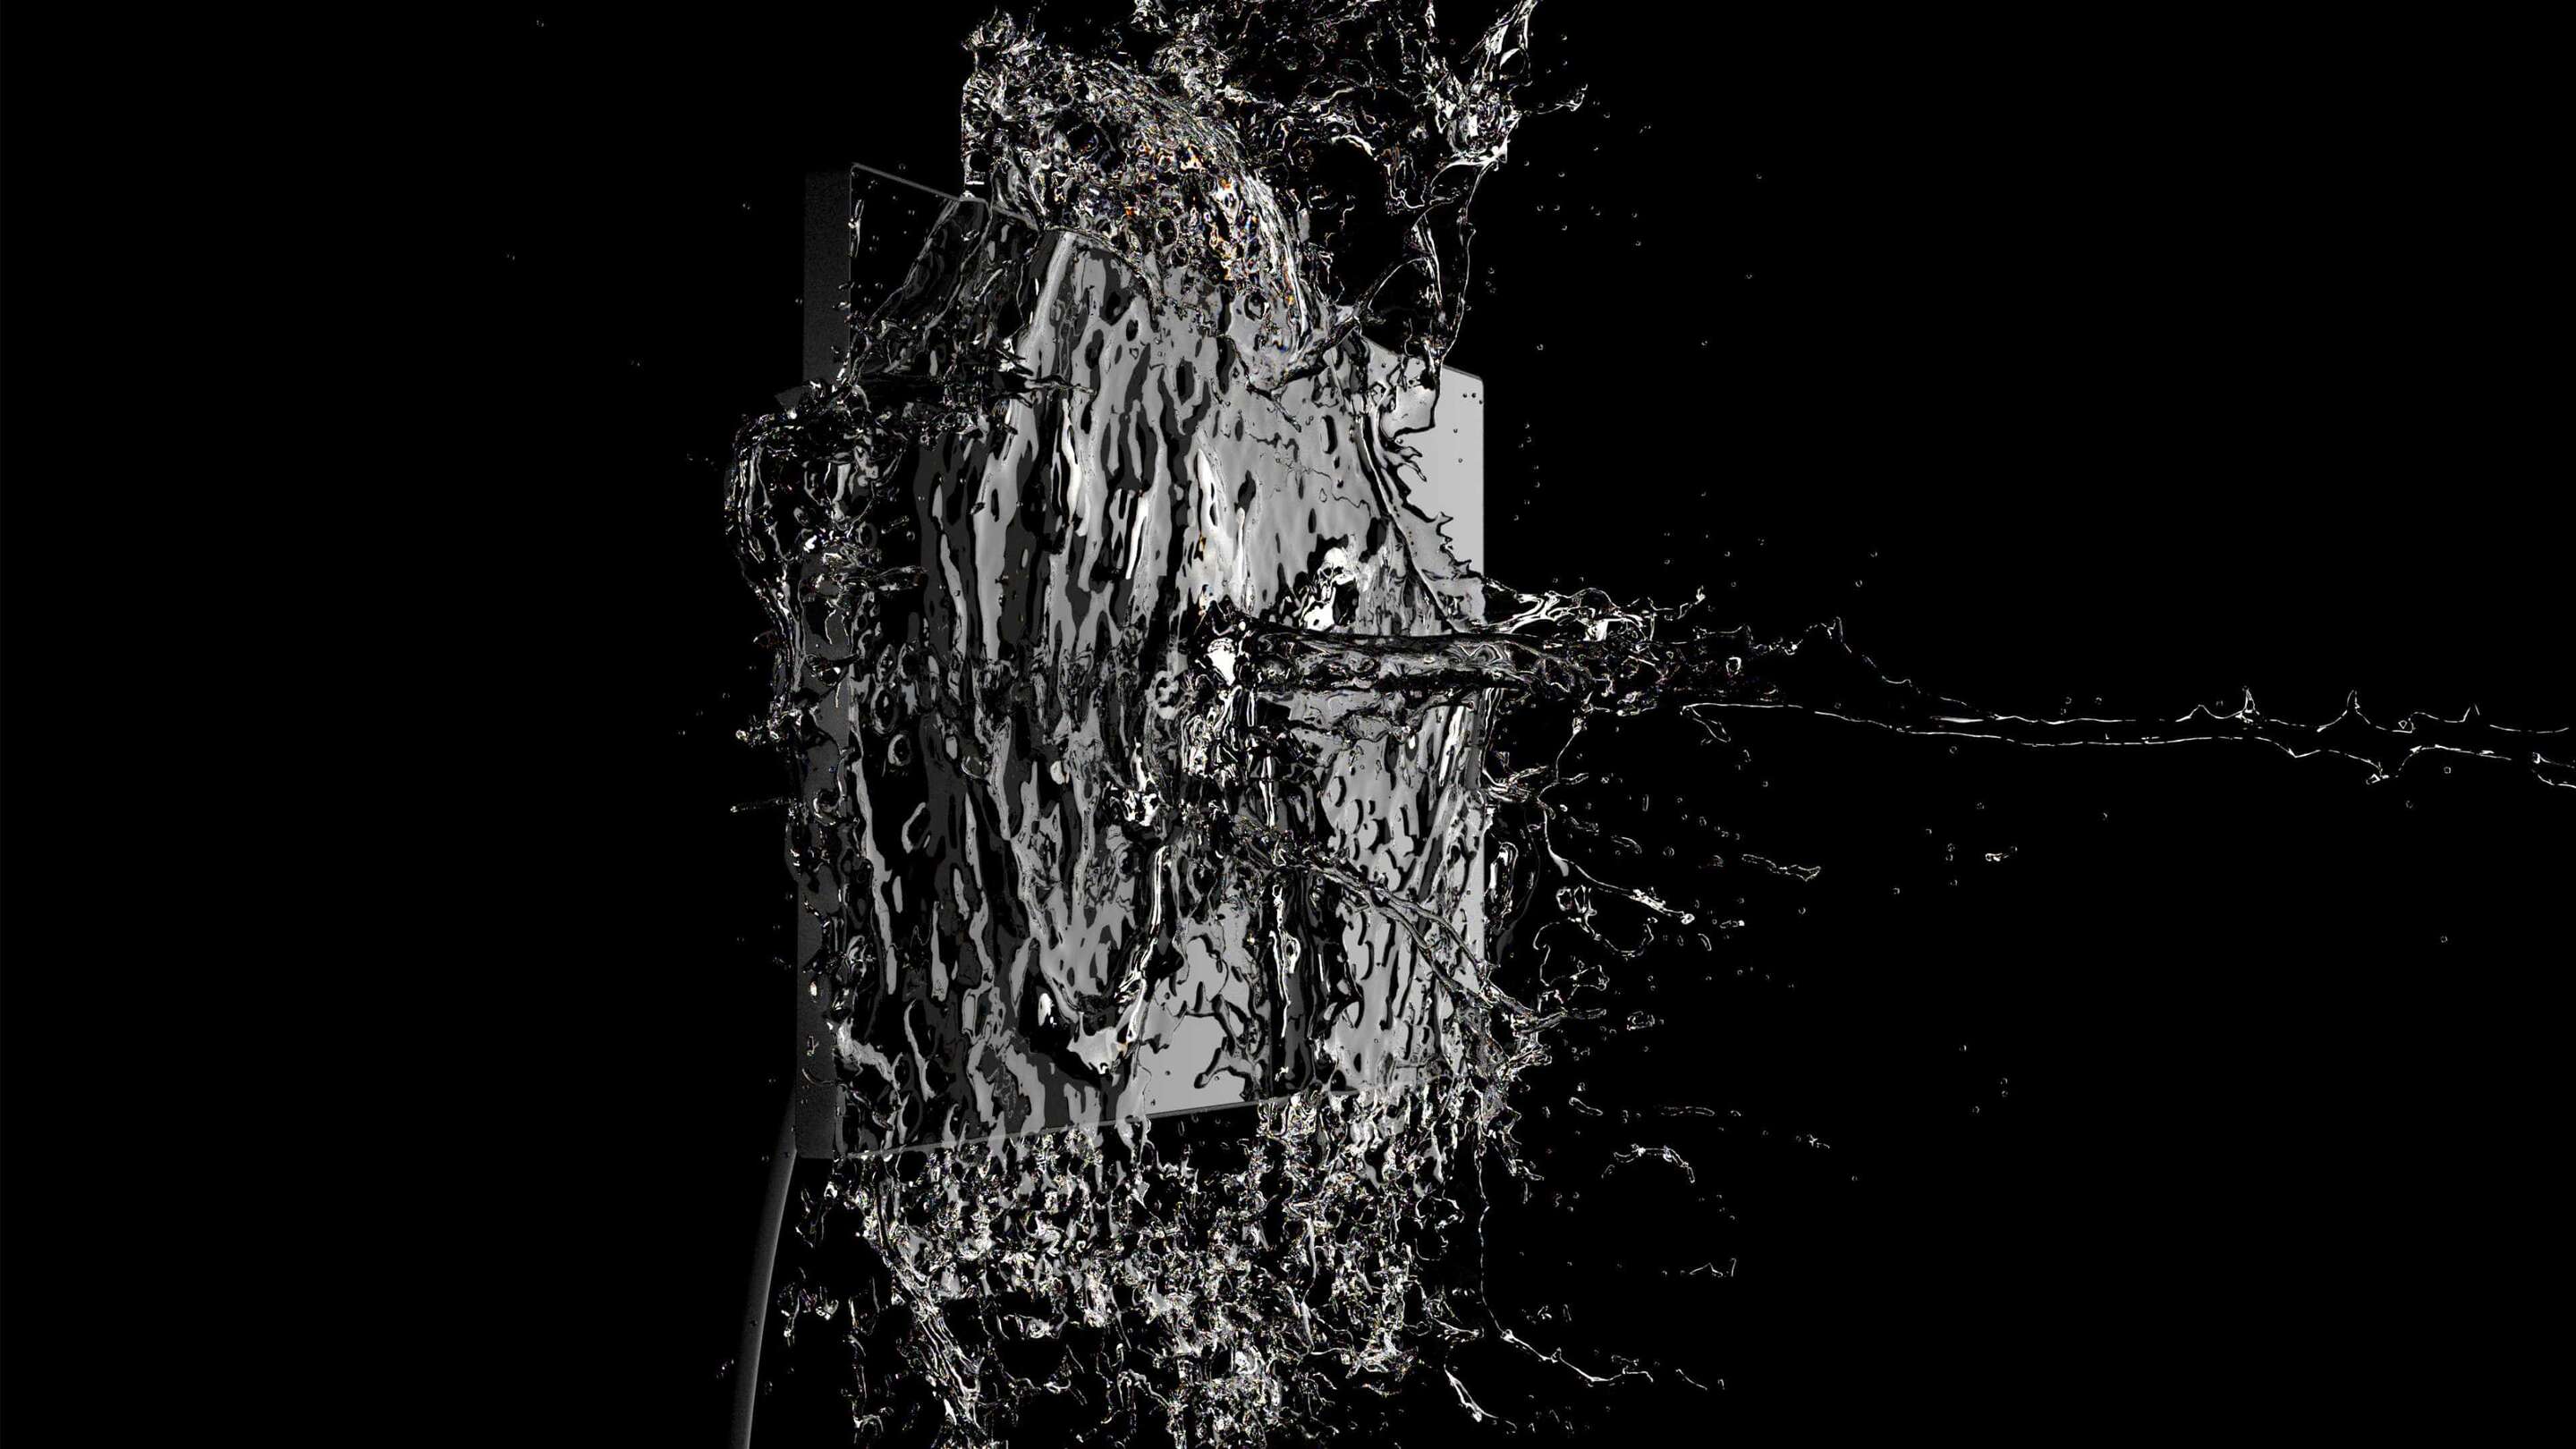 Industrial Monitor - Waterproof a water splashing out of a square object